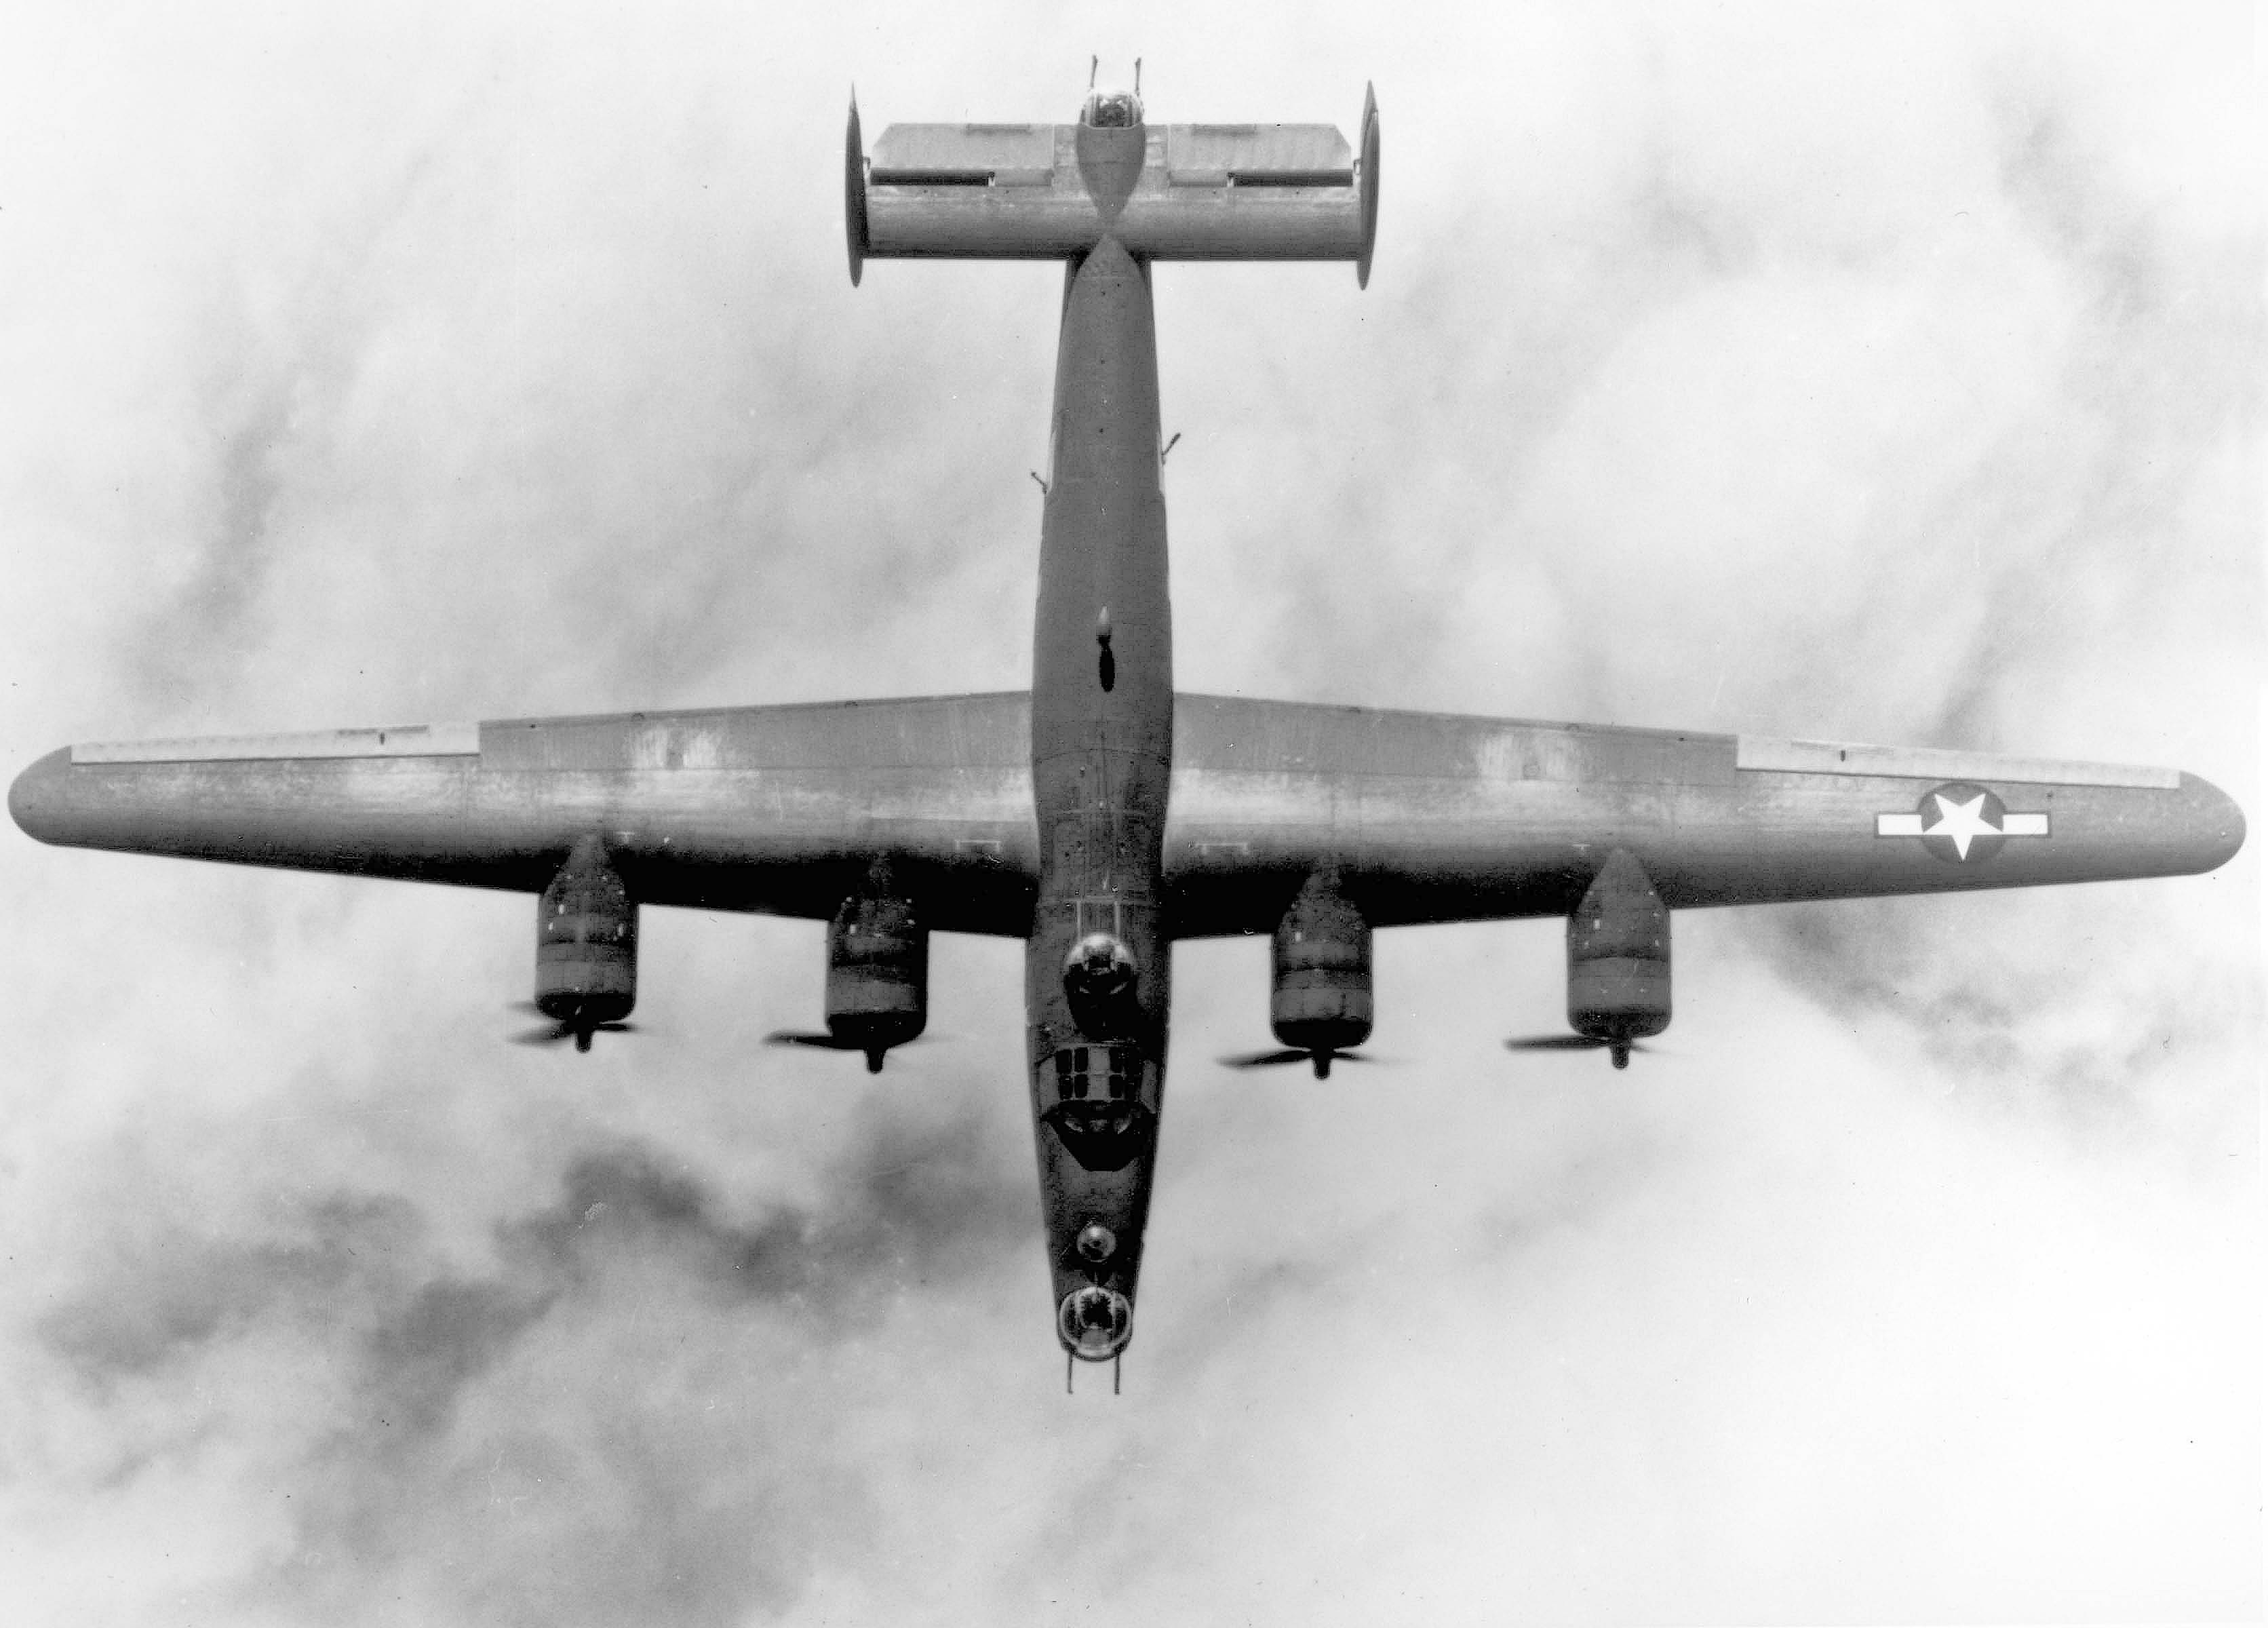 B-24 in flight, viewed from above, circa 1942-1945